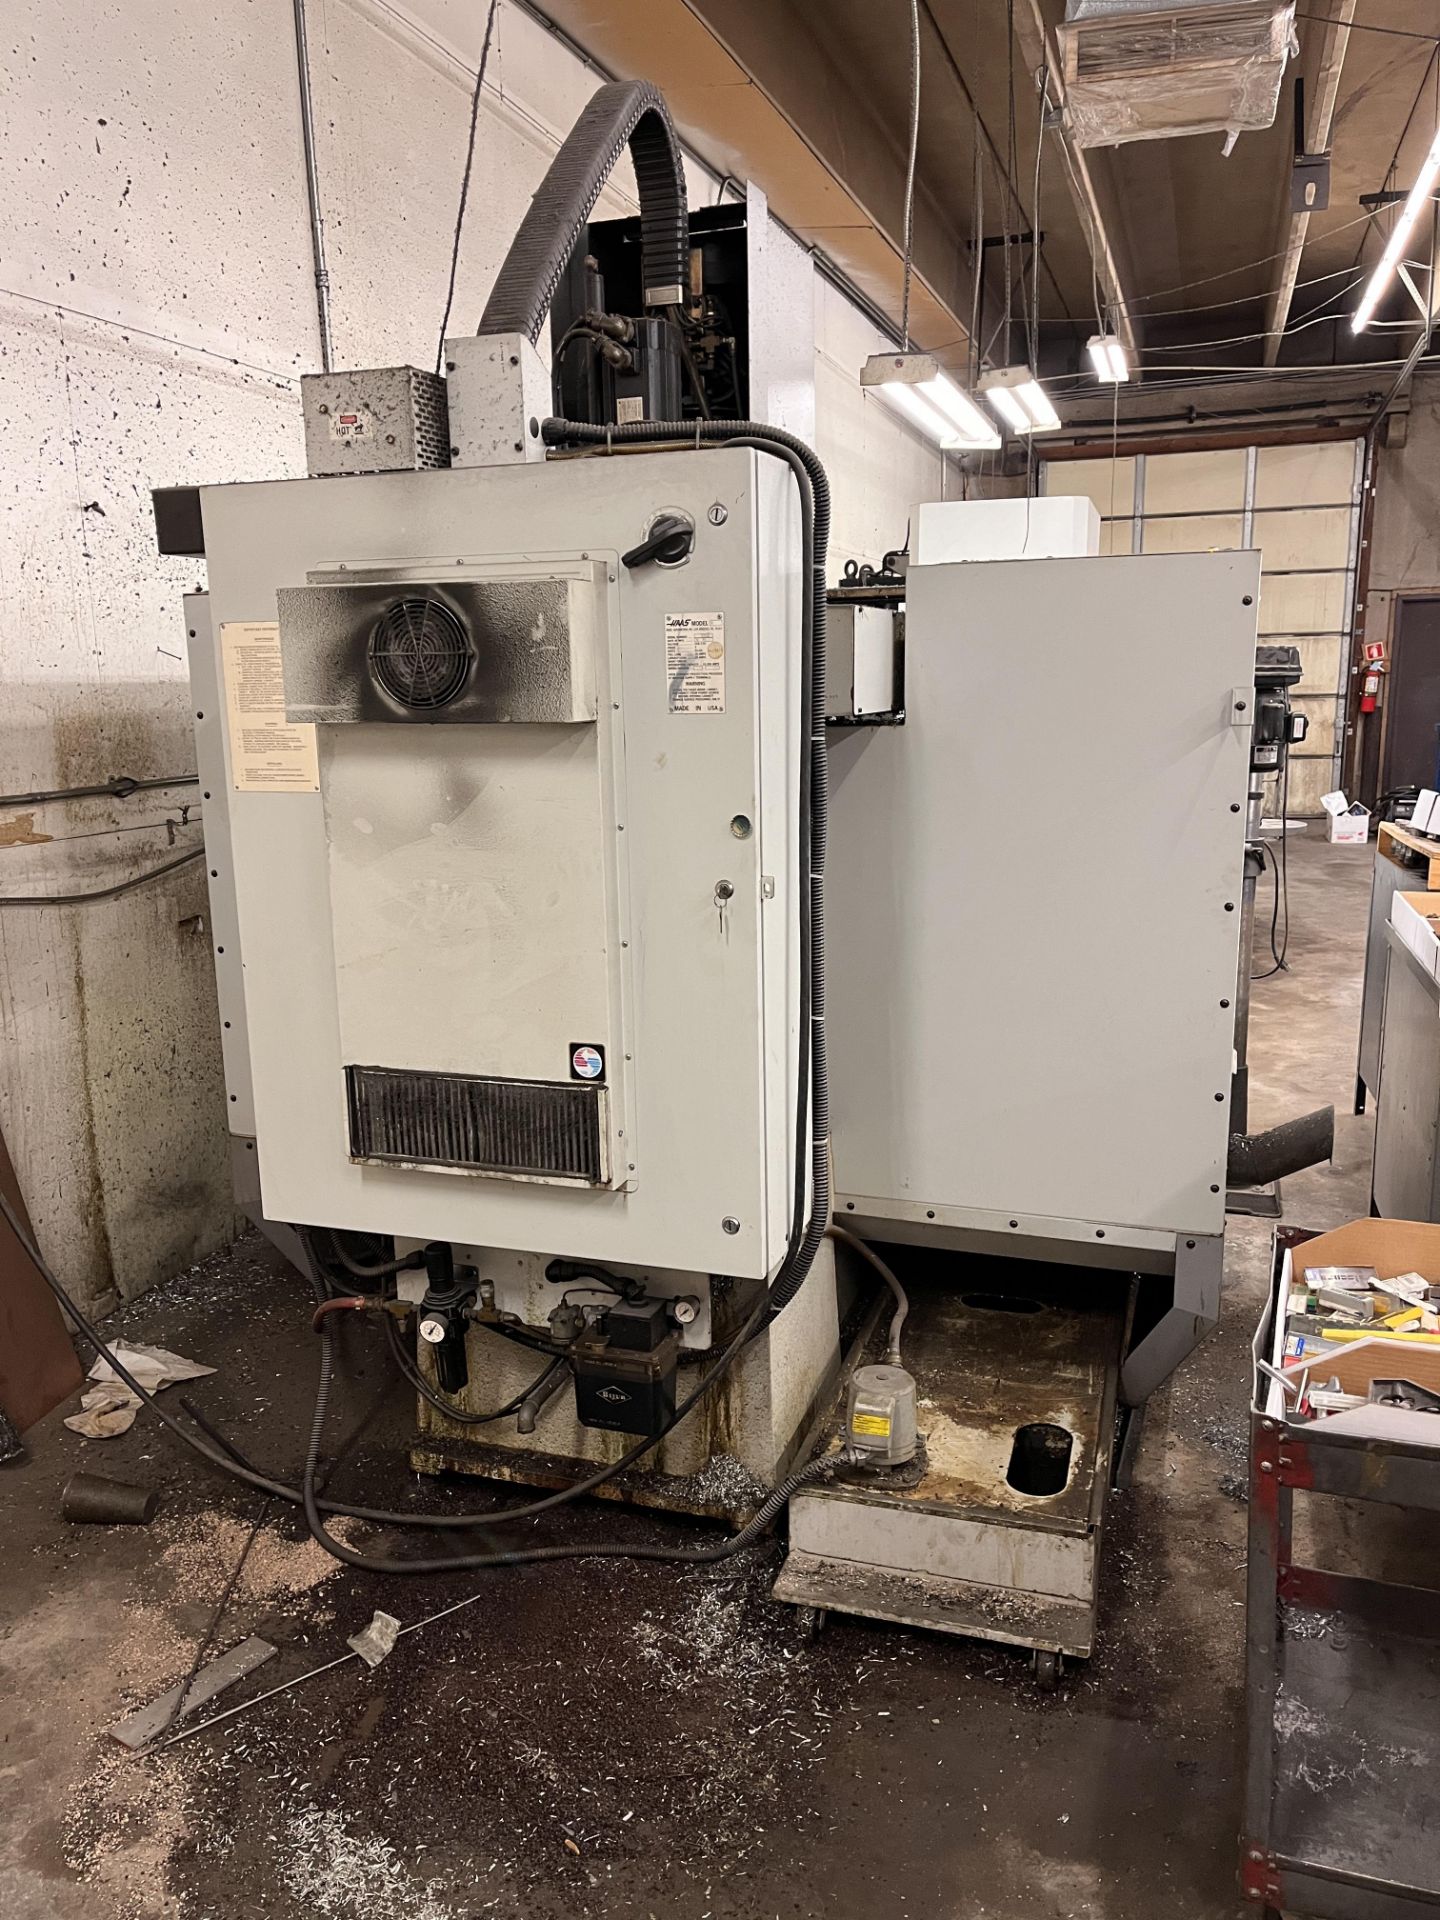 1996 Haas VFO CNC Vertical Machining Center - Image 9 of 13